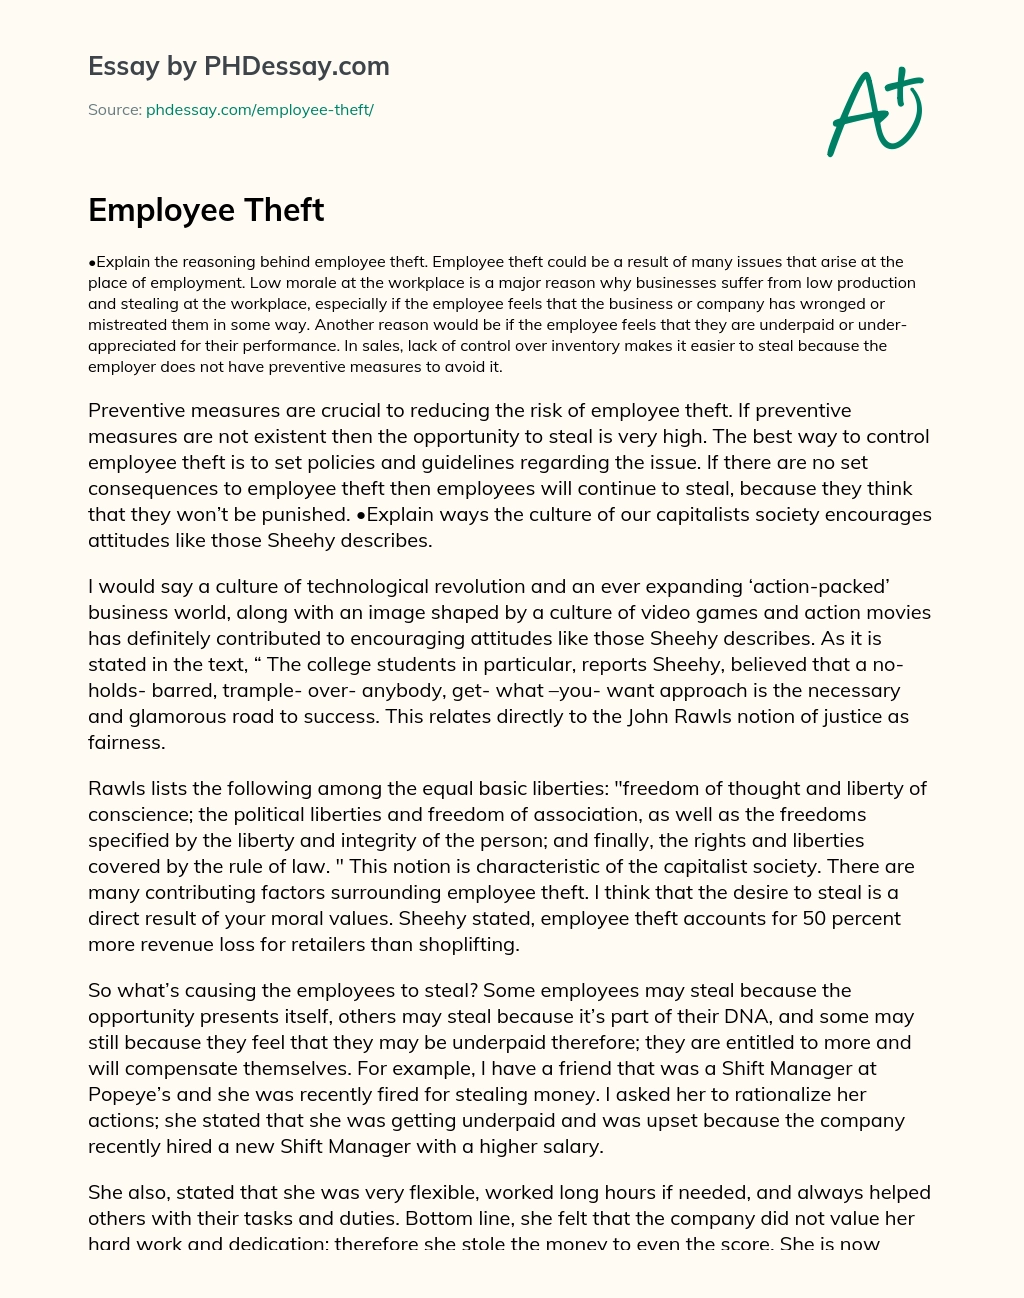 Реферат: Employee Theft Essay Research Paper INTRODUCTION